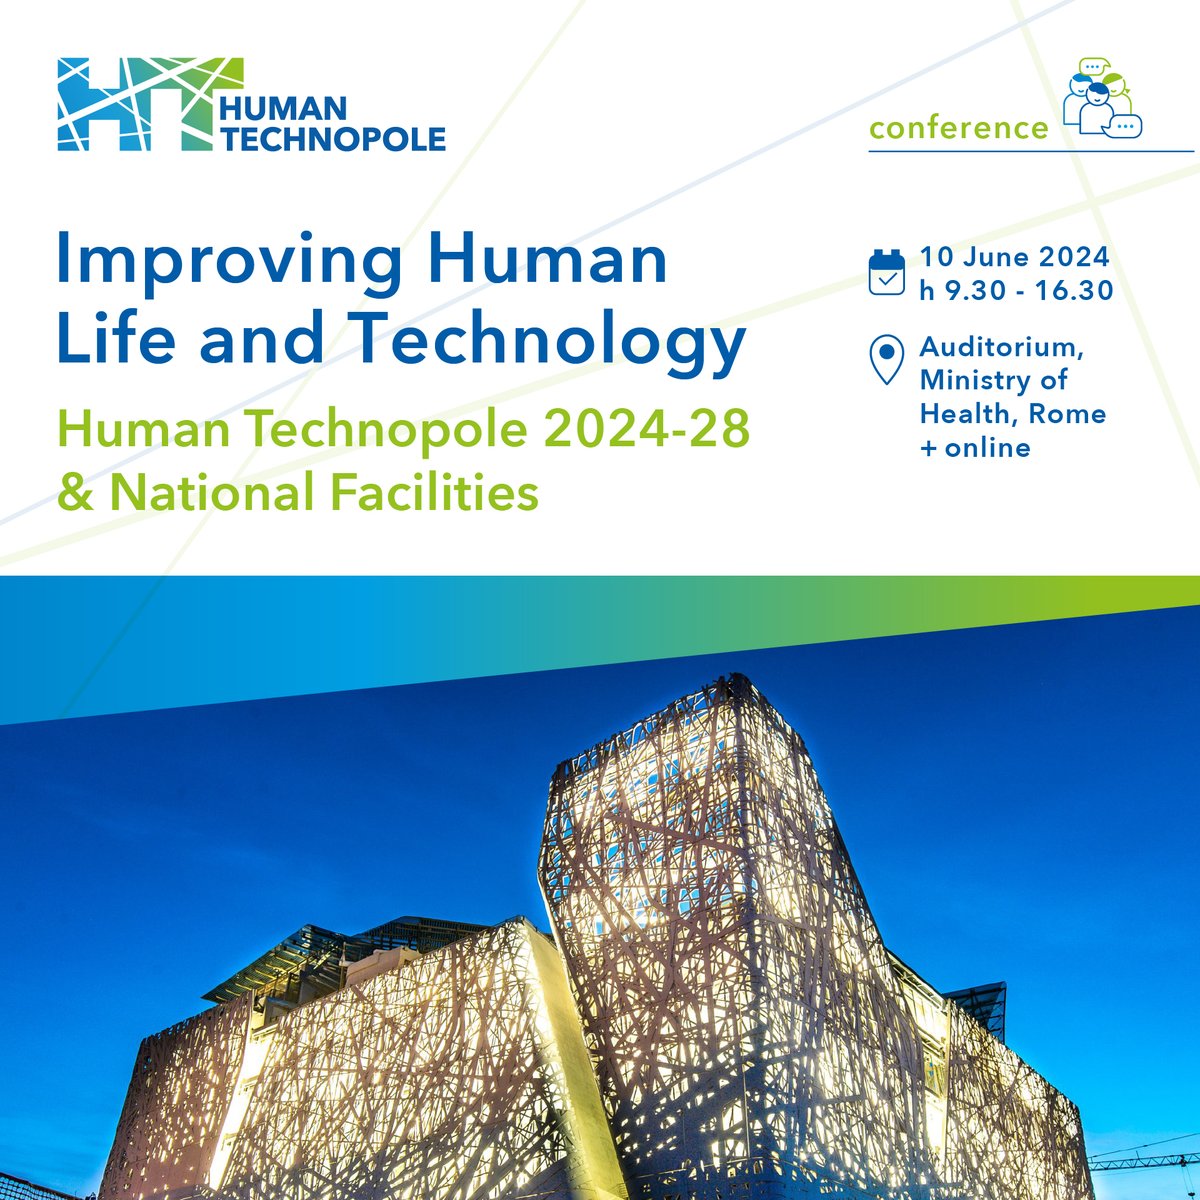 📍 HT's National Facilities are about to open to the scientific community! To present them and our 2024-2028 Strategic Plan, we are pleased to announce the event 'Improving Human Life and Technology' on 10 June in Rome and online. Register by 3 June 👉humantechnopole.it/en/trainings/i…